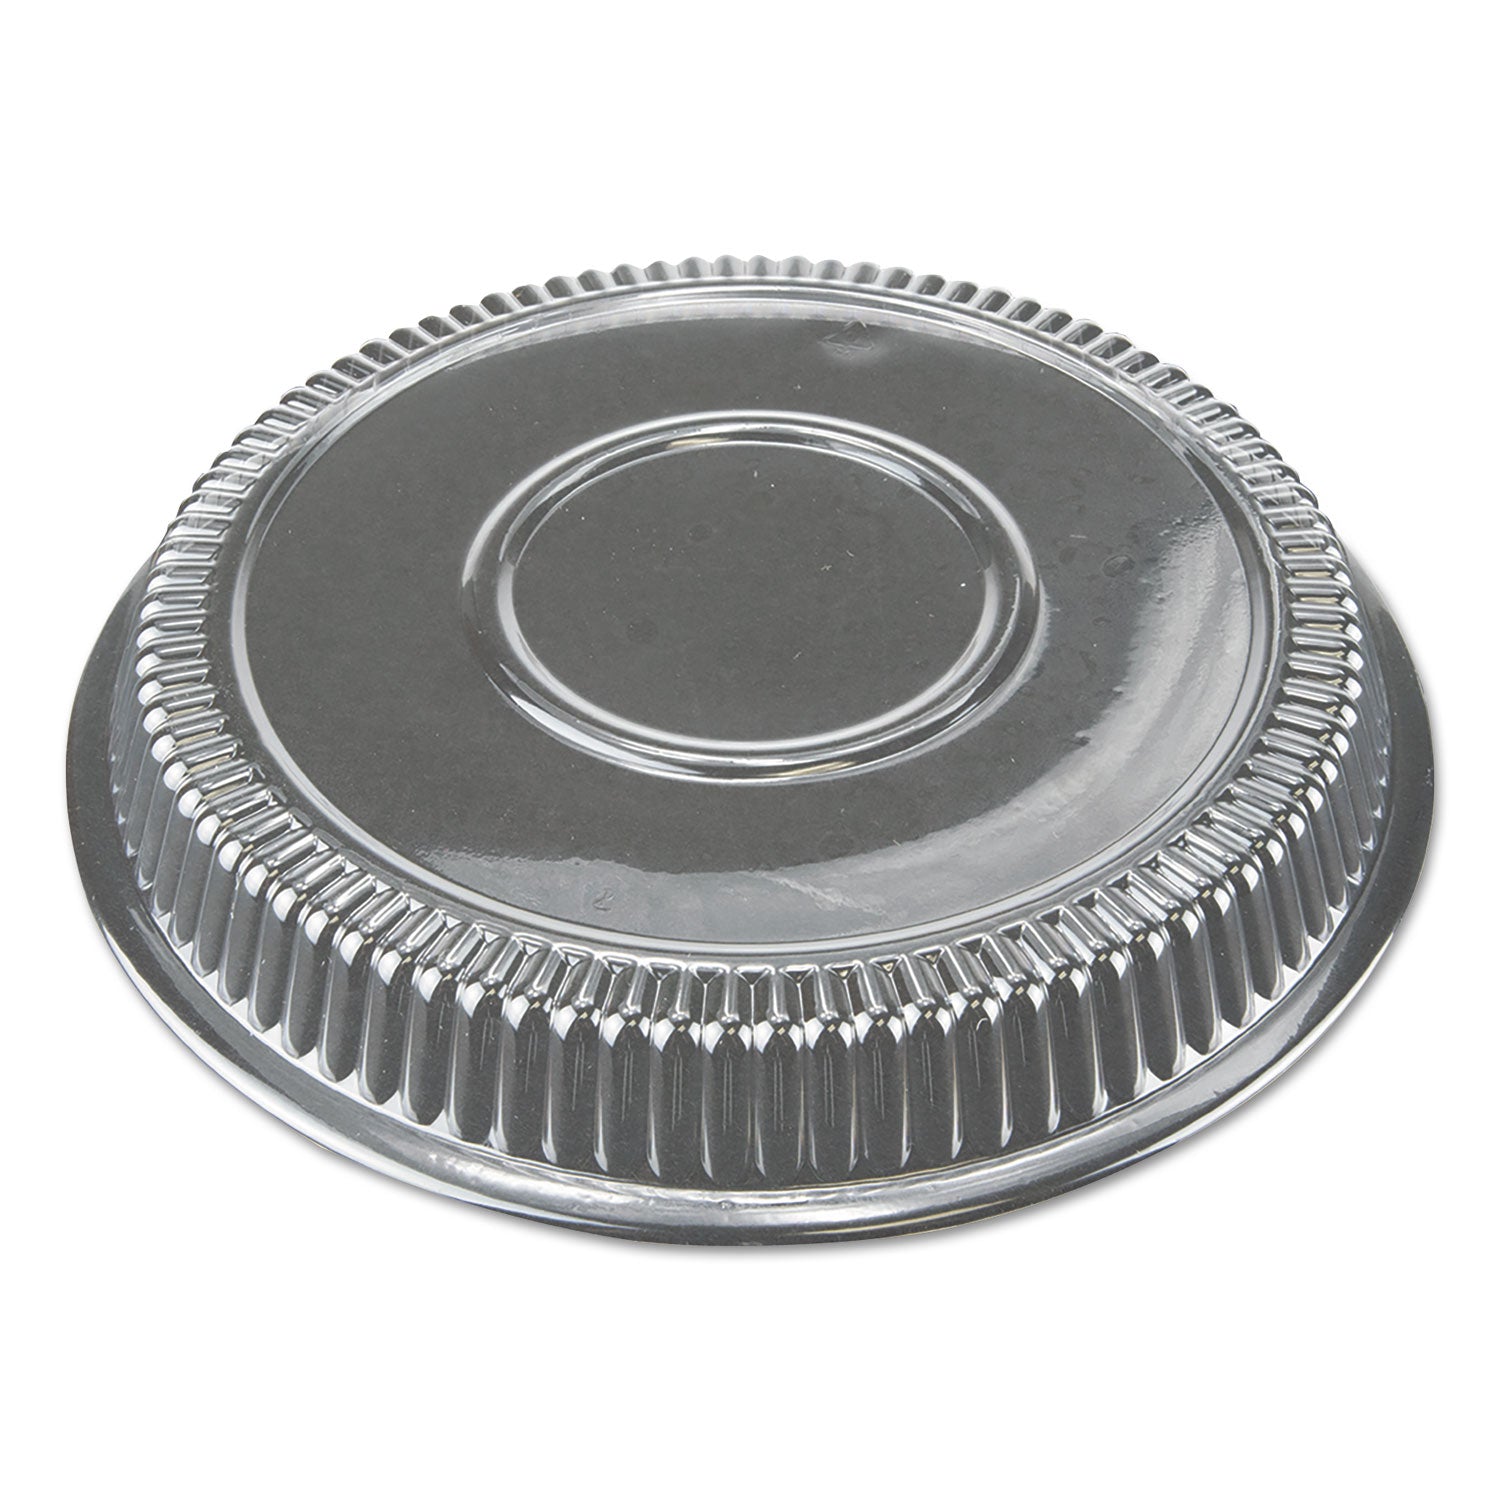 dome-lids-for-9-round-containers-9-diameter-x-1h-clear-plastic-500-carton_dpkp290500 - 1